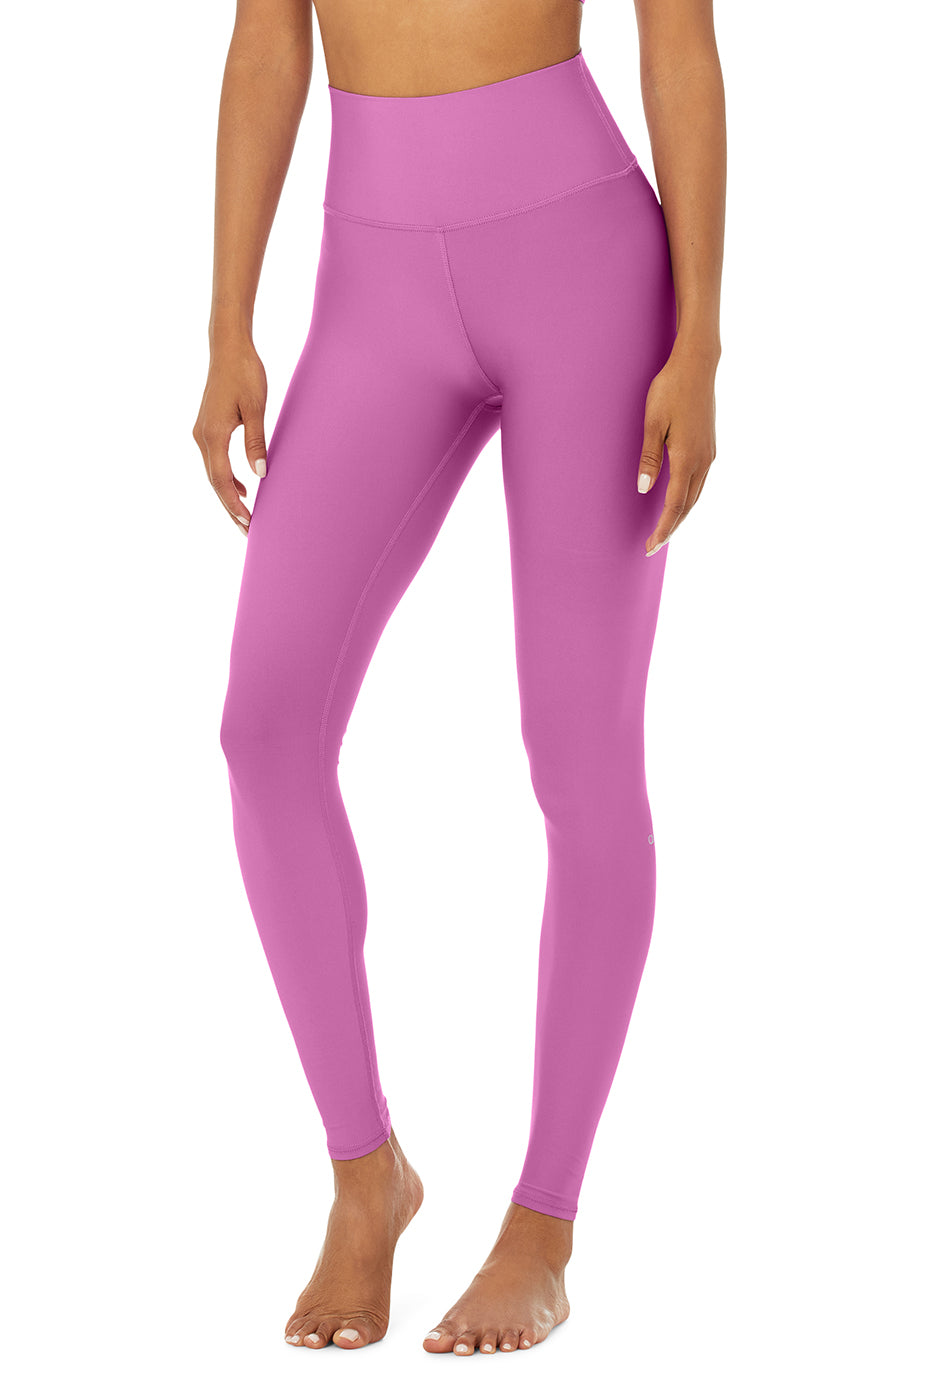 High-Waist Airlift Legging in Electric Violet by Alo Yoga | Ballet 